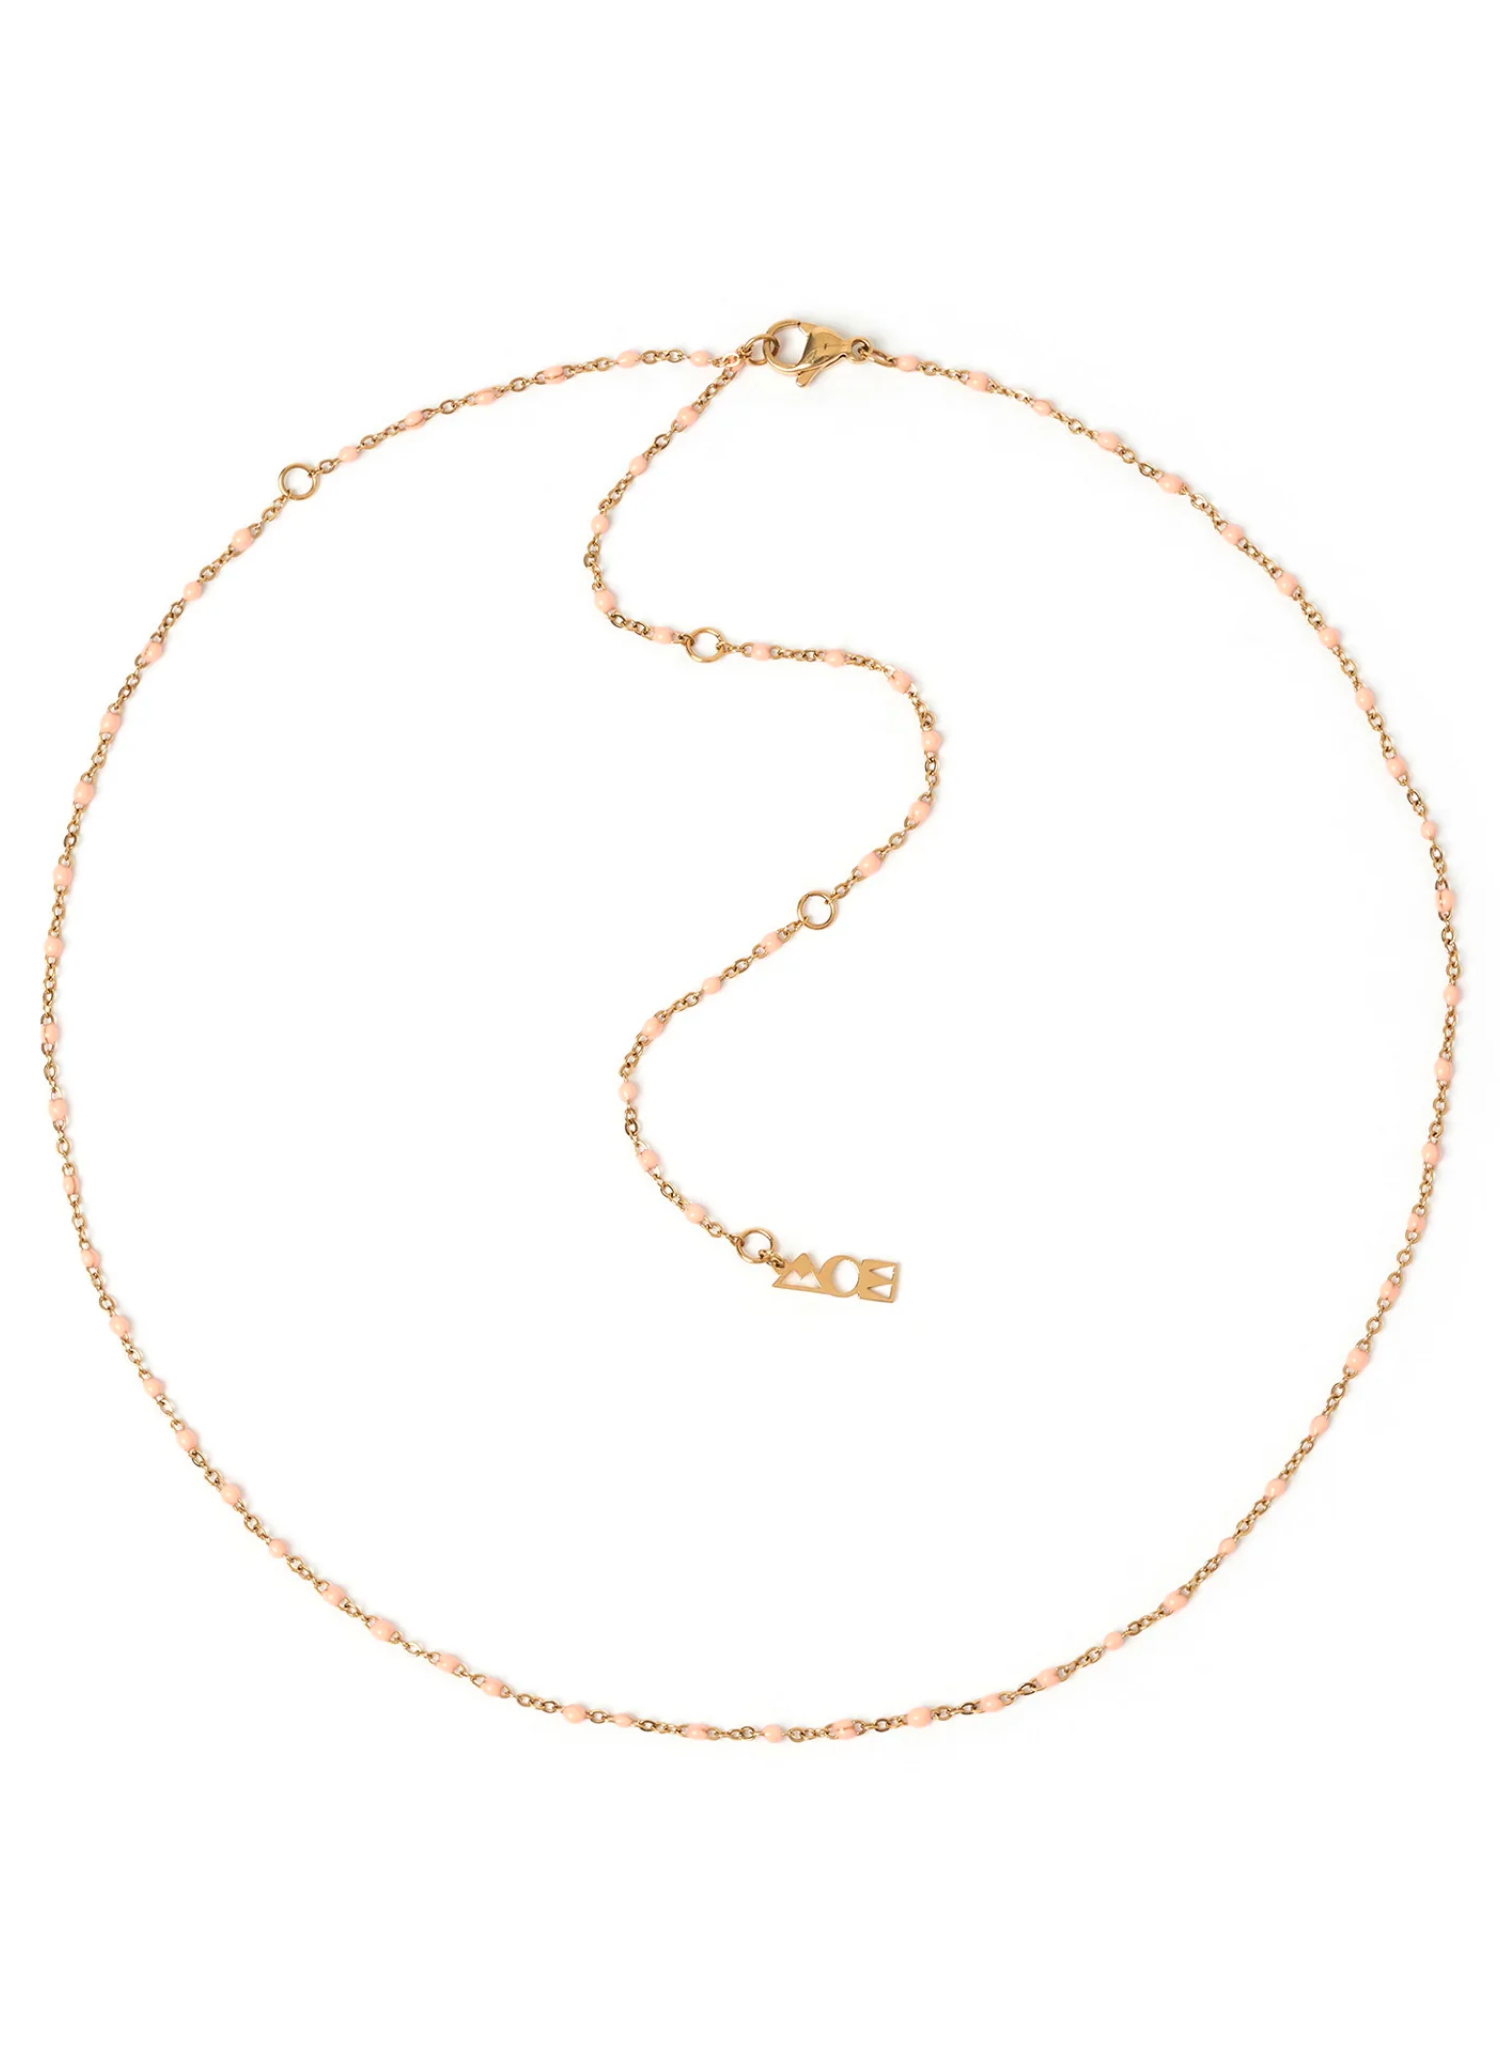 Peggy Gold and Enamel Necklace - Peach